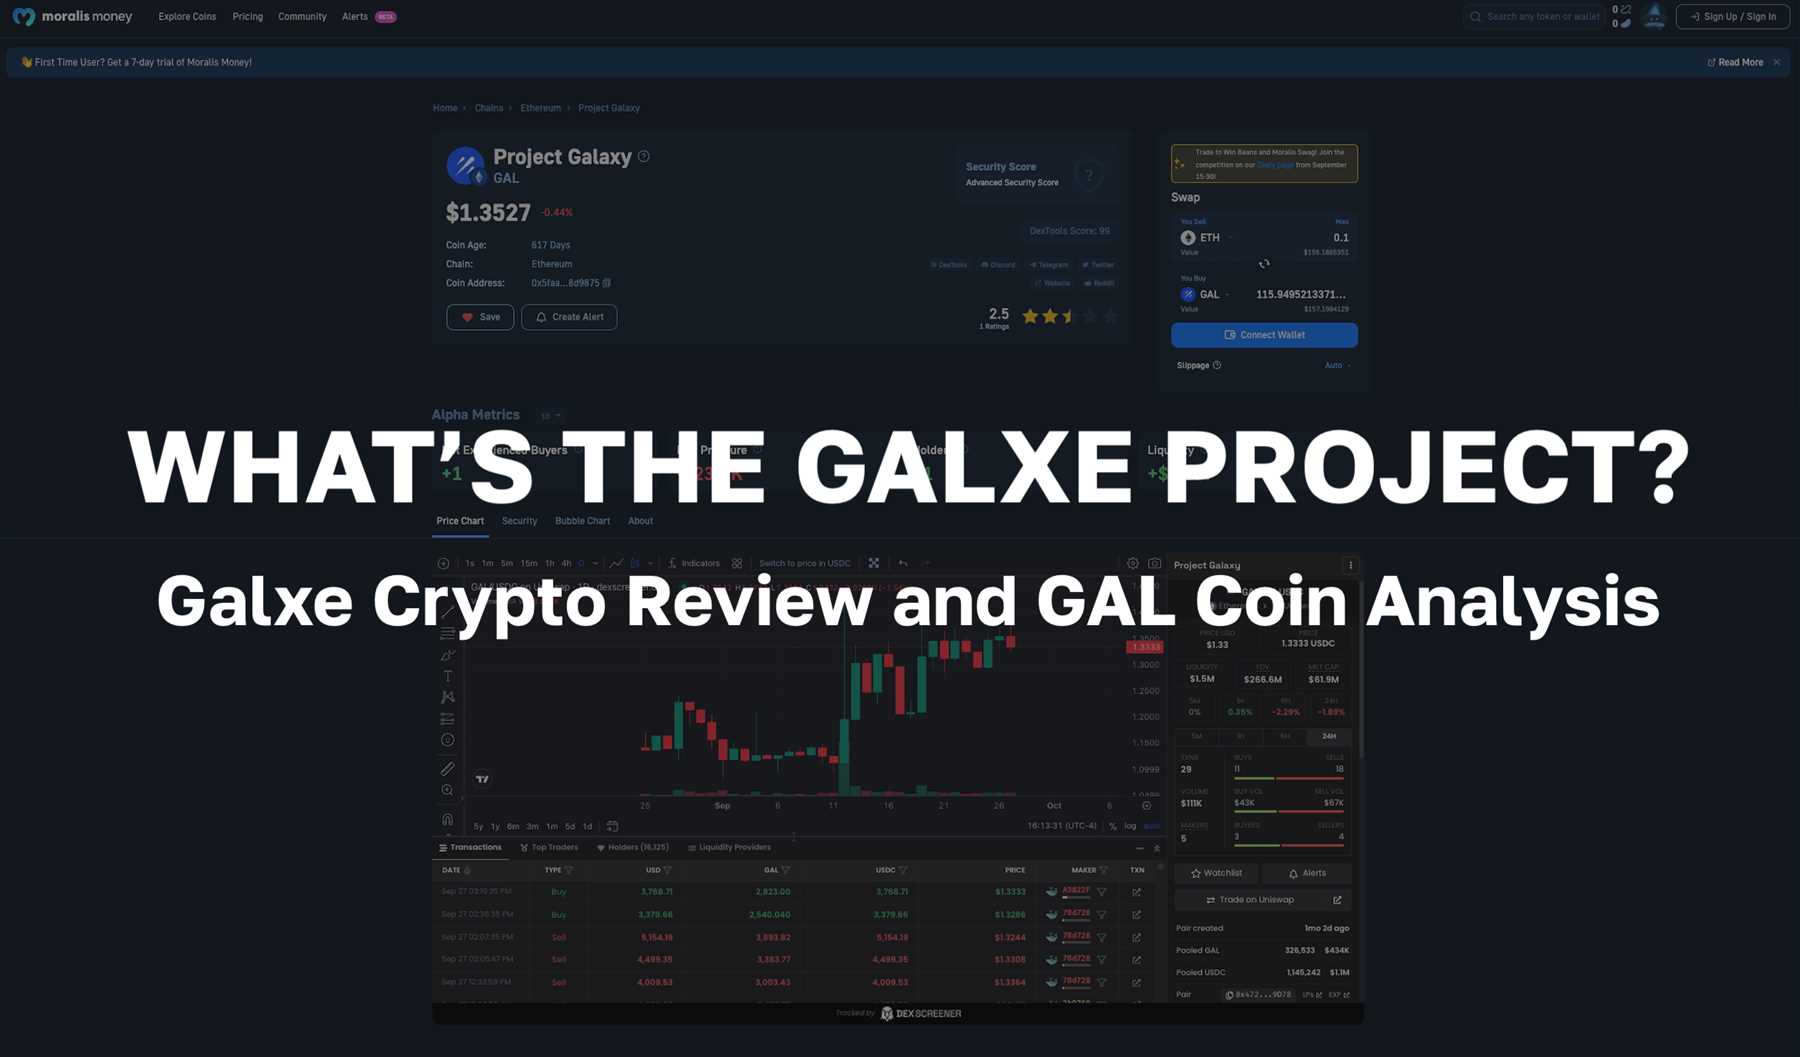 Market demand and user adoption of Galxe (GAL)